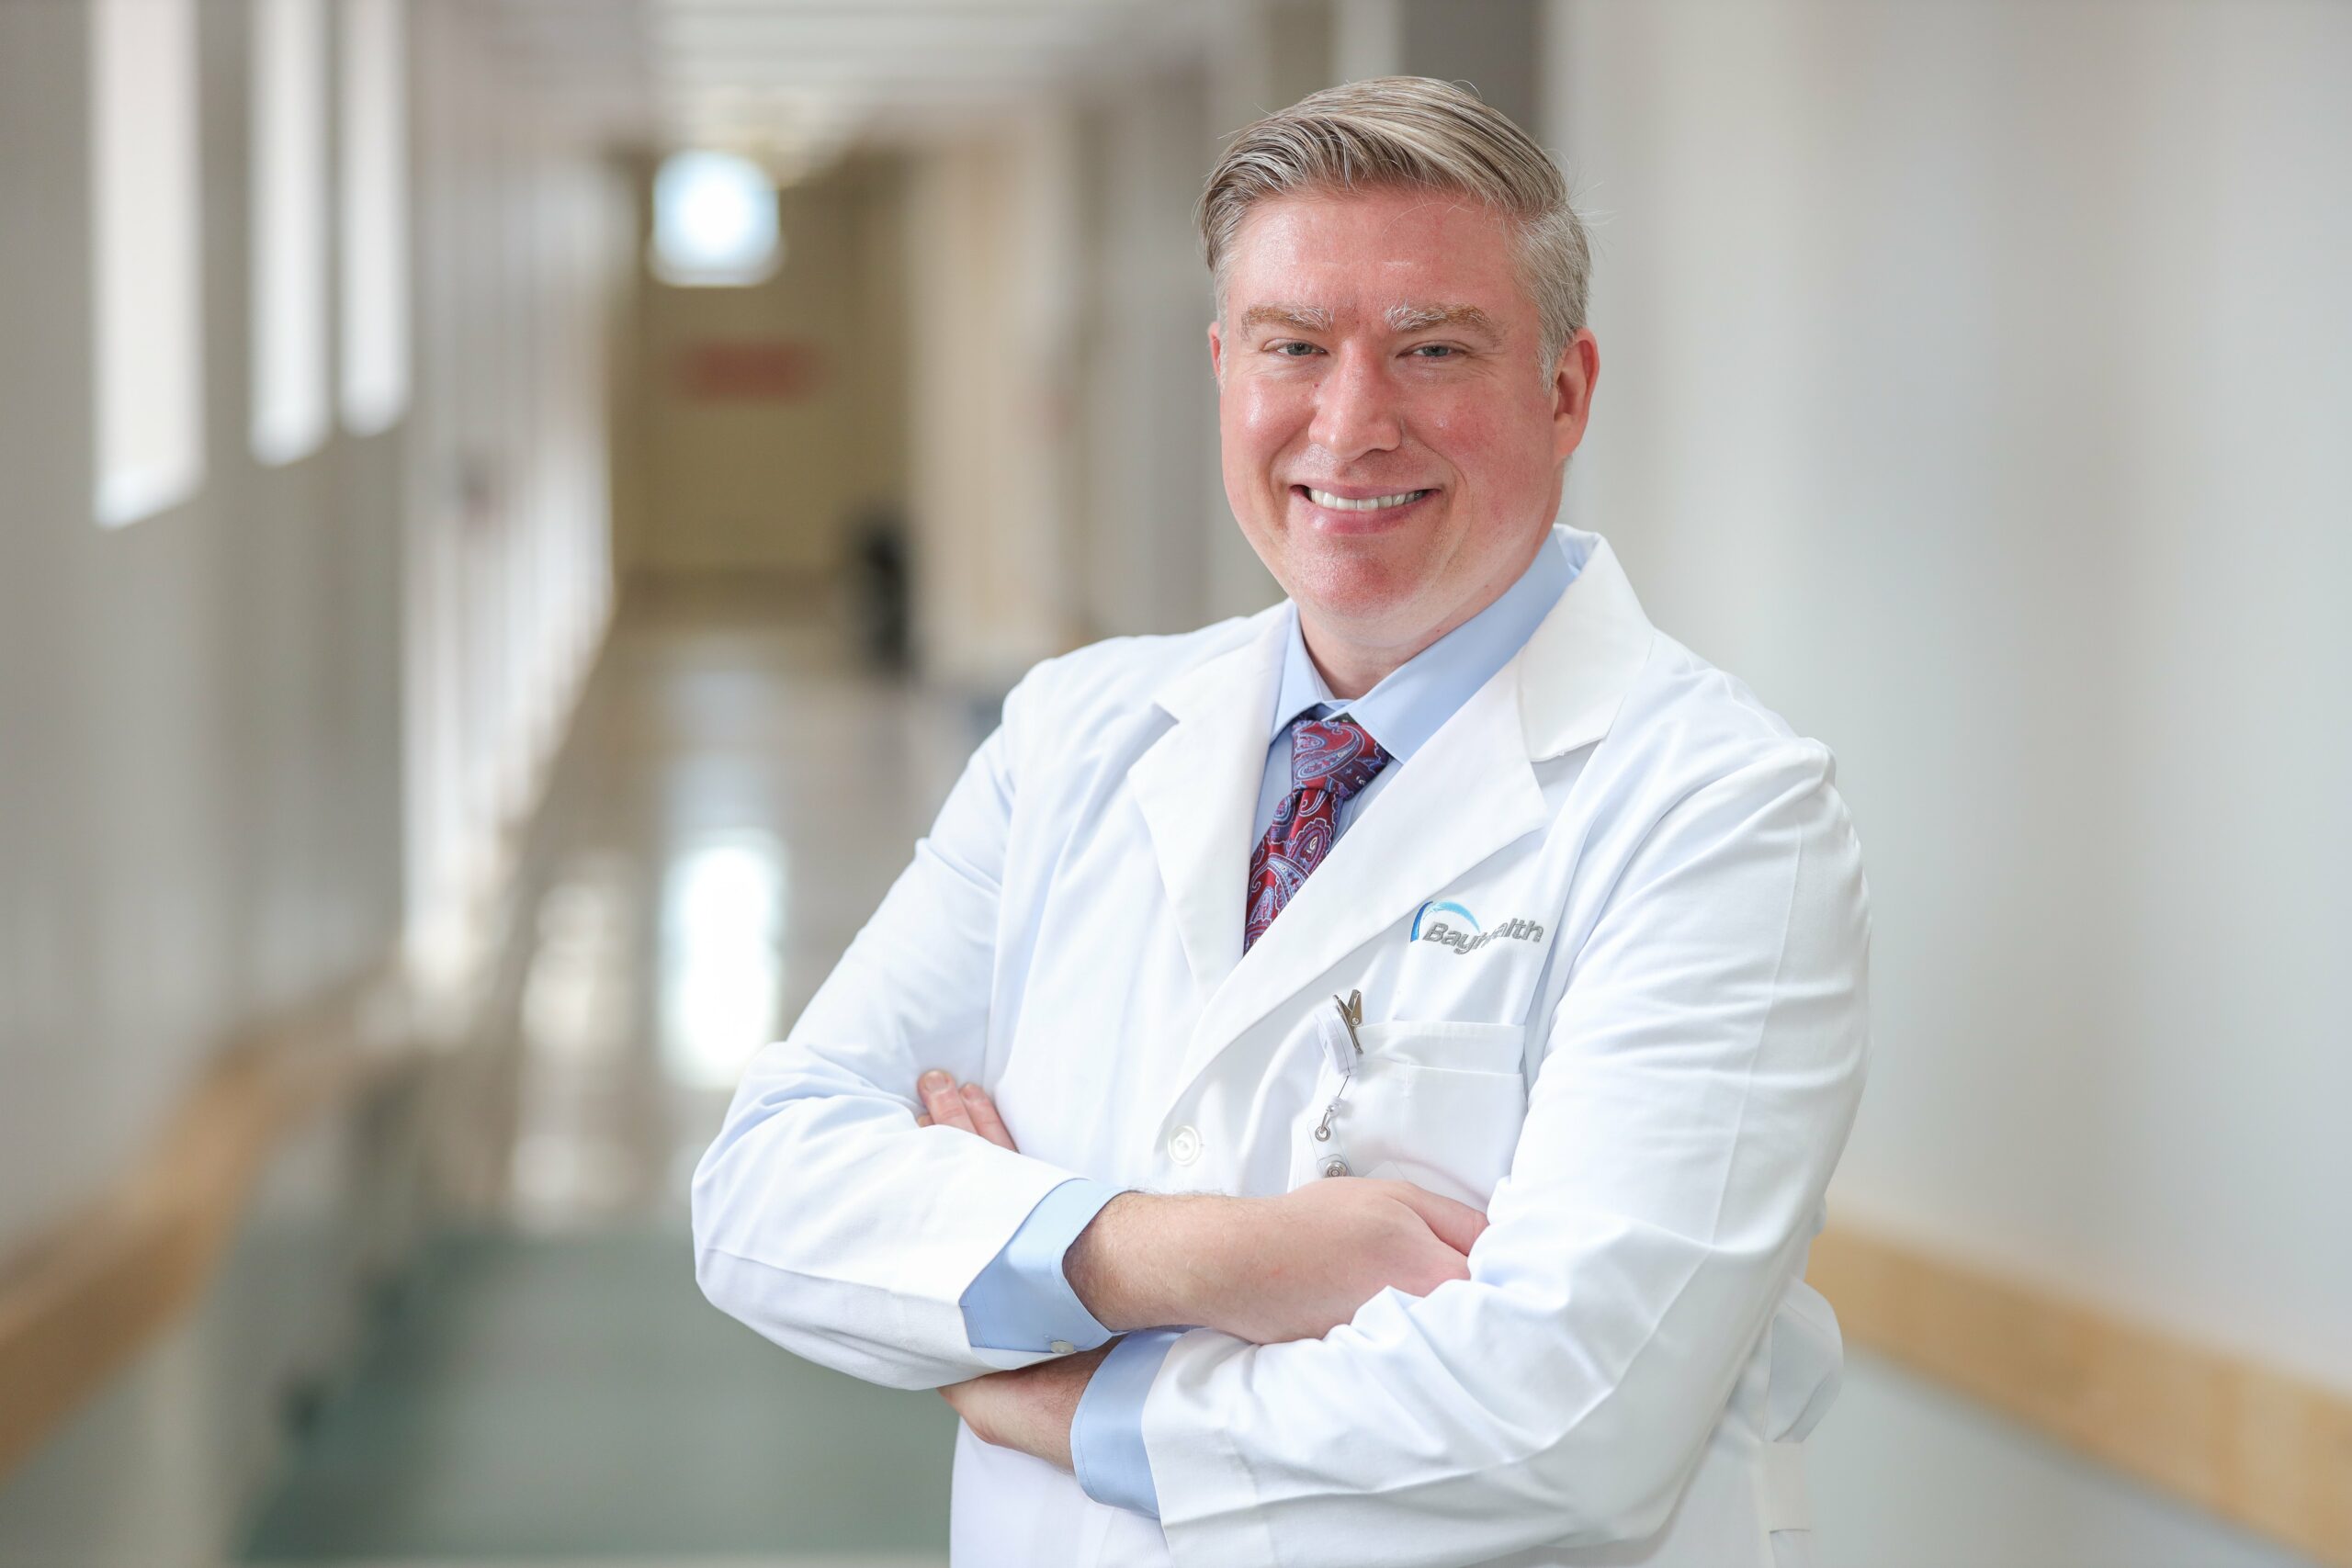 Featured image for “Bayhealth Welcomes Neurosurgeon, Sussex County Native Dr. Sigler”